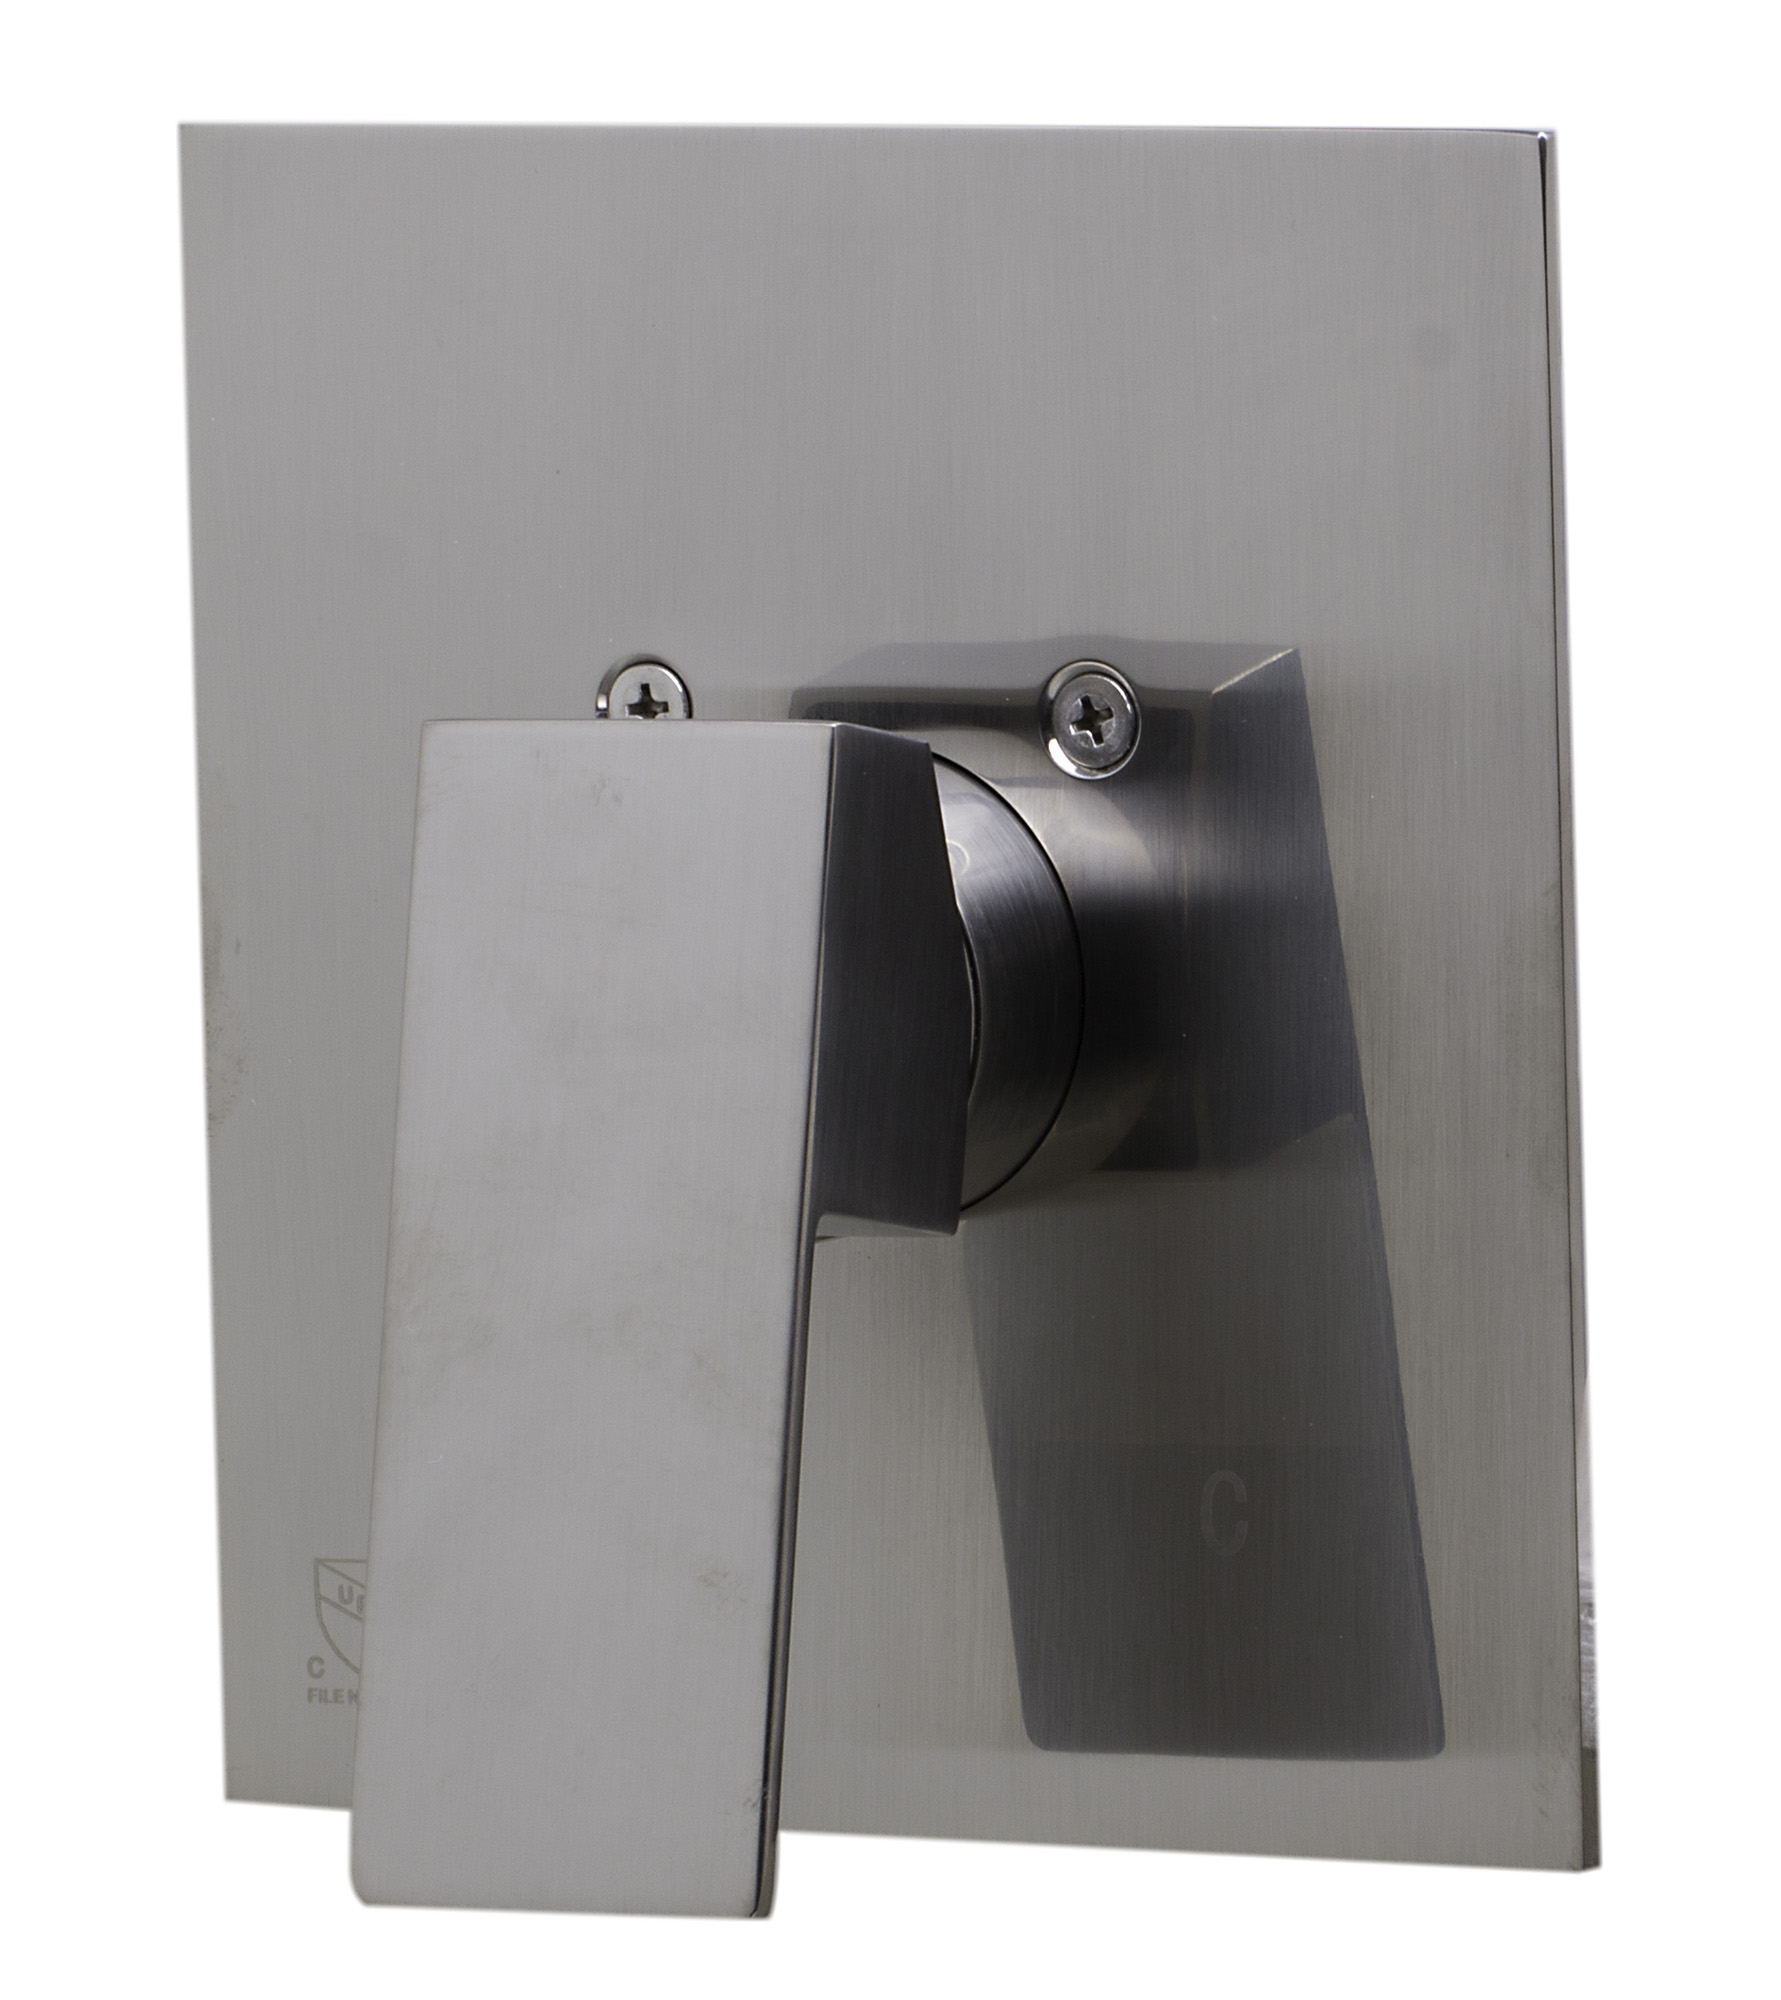 ALFI brand AB5501-BN Brushed Nickel Shower Valve Mixer with Square Lever Handle